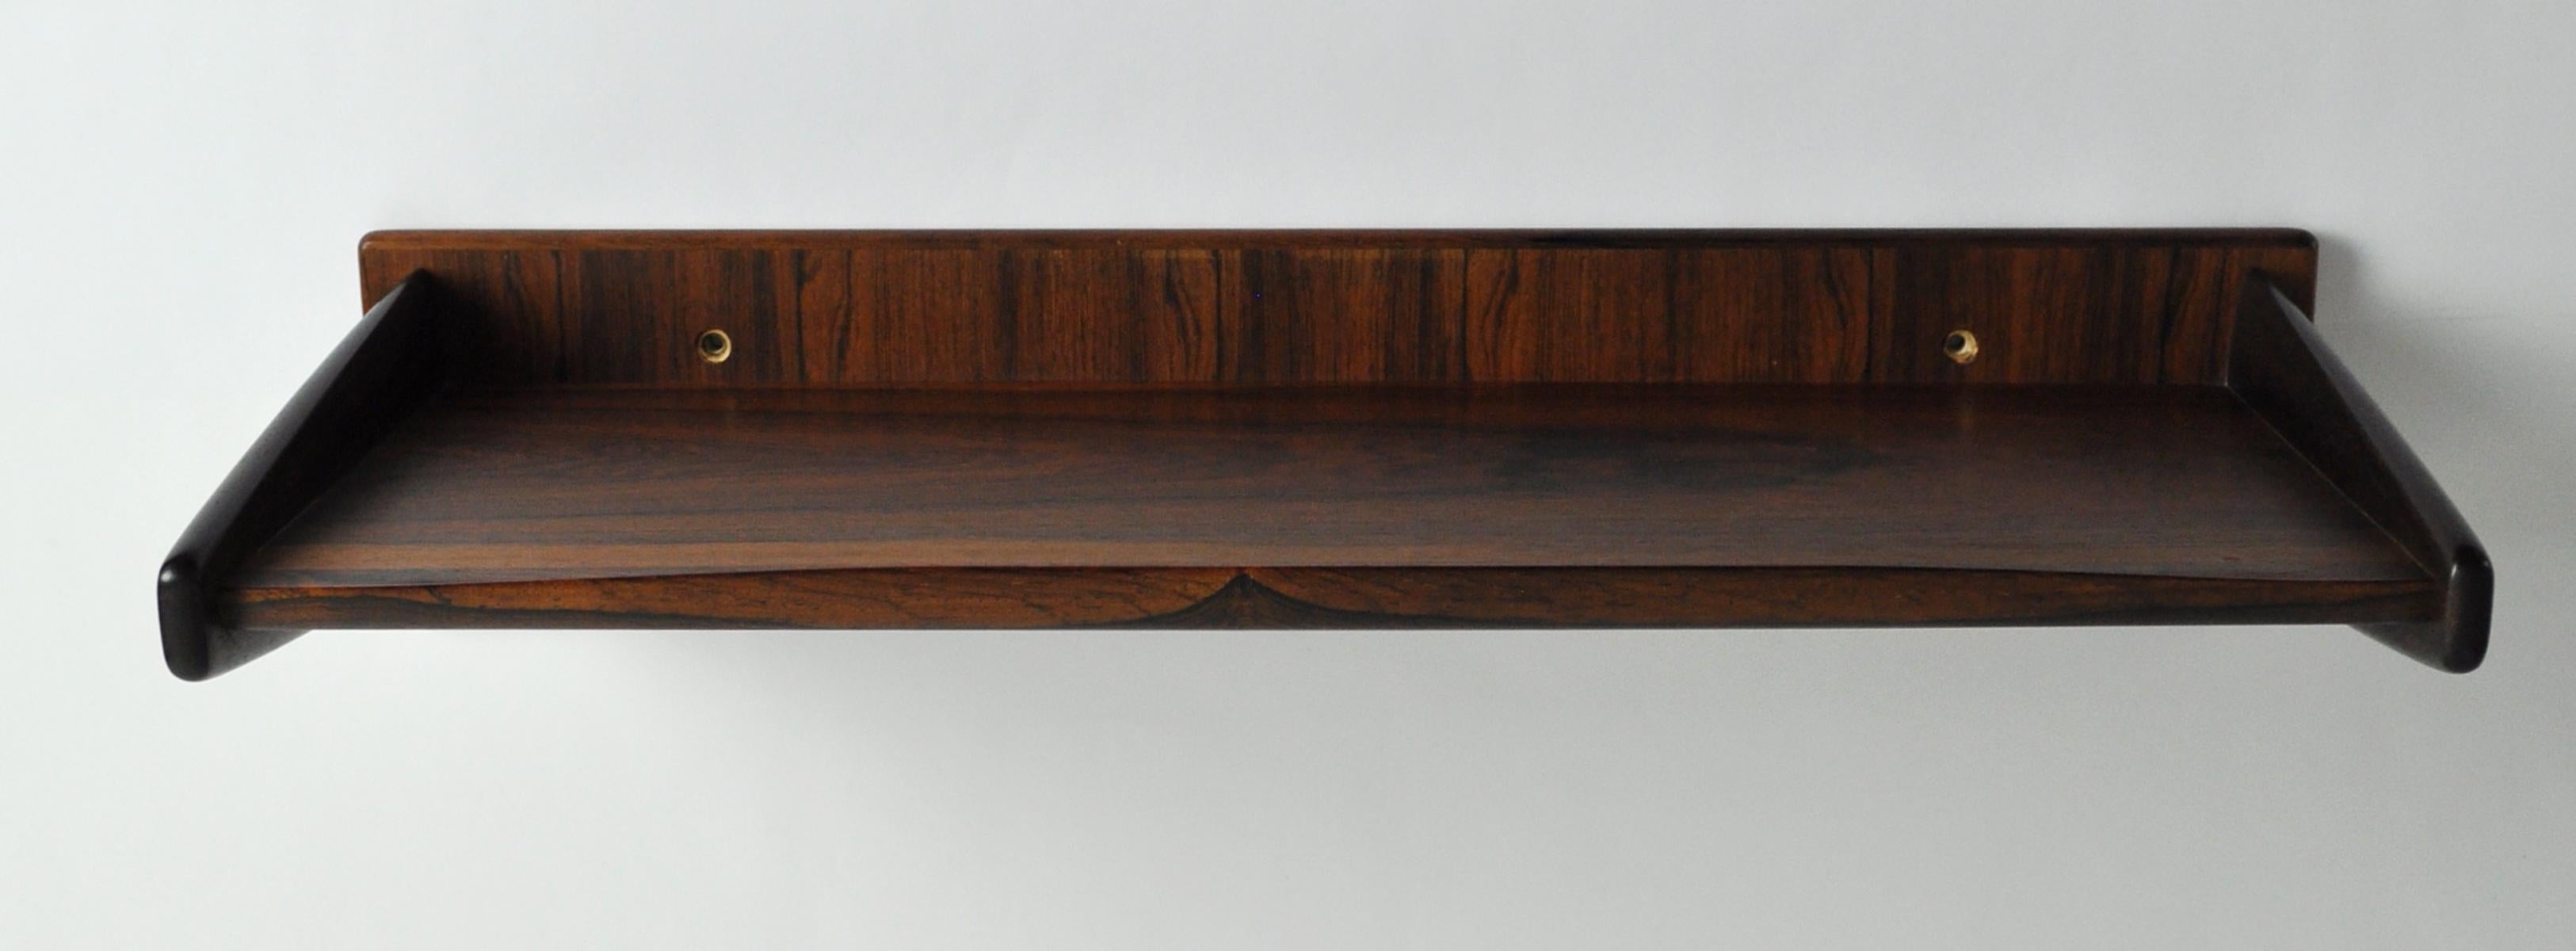 Wall hanging Danish Modern Console in Brazillian Rosewood by Melvin Mikkelsen Møbler, Denmark. Labeled by the maker and Danish Furniture Makers.